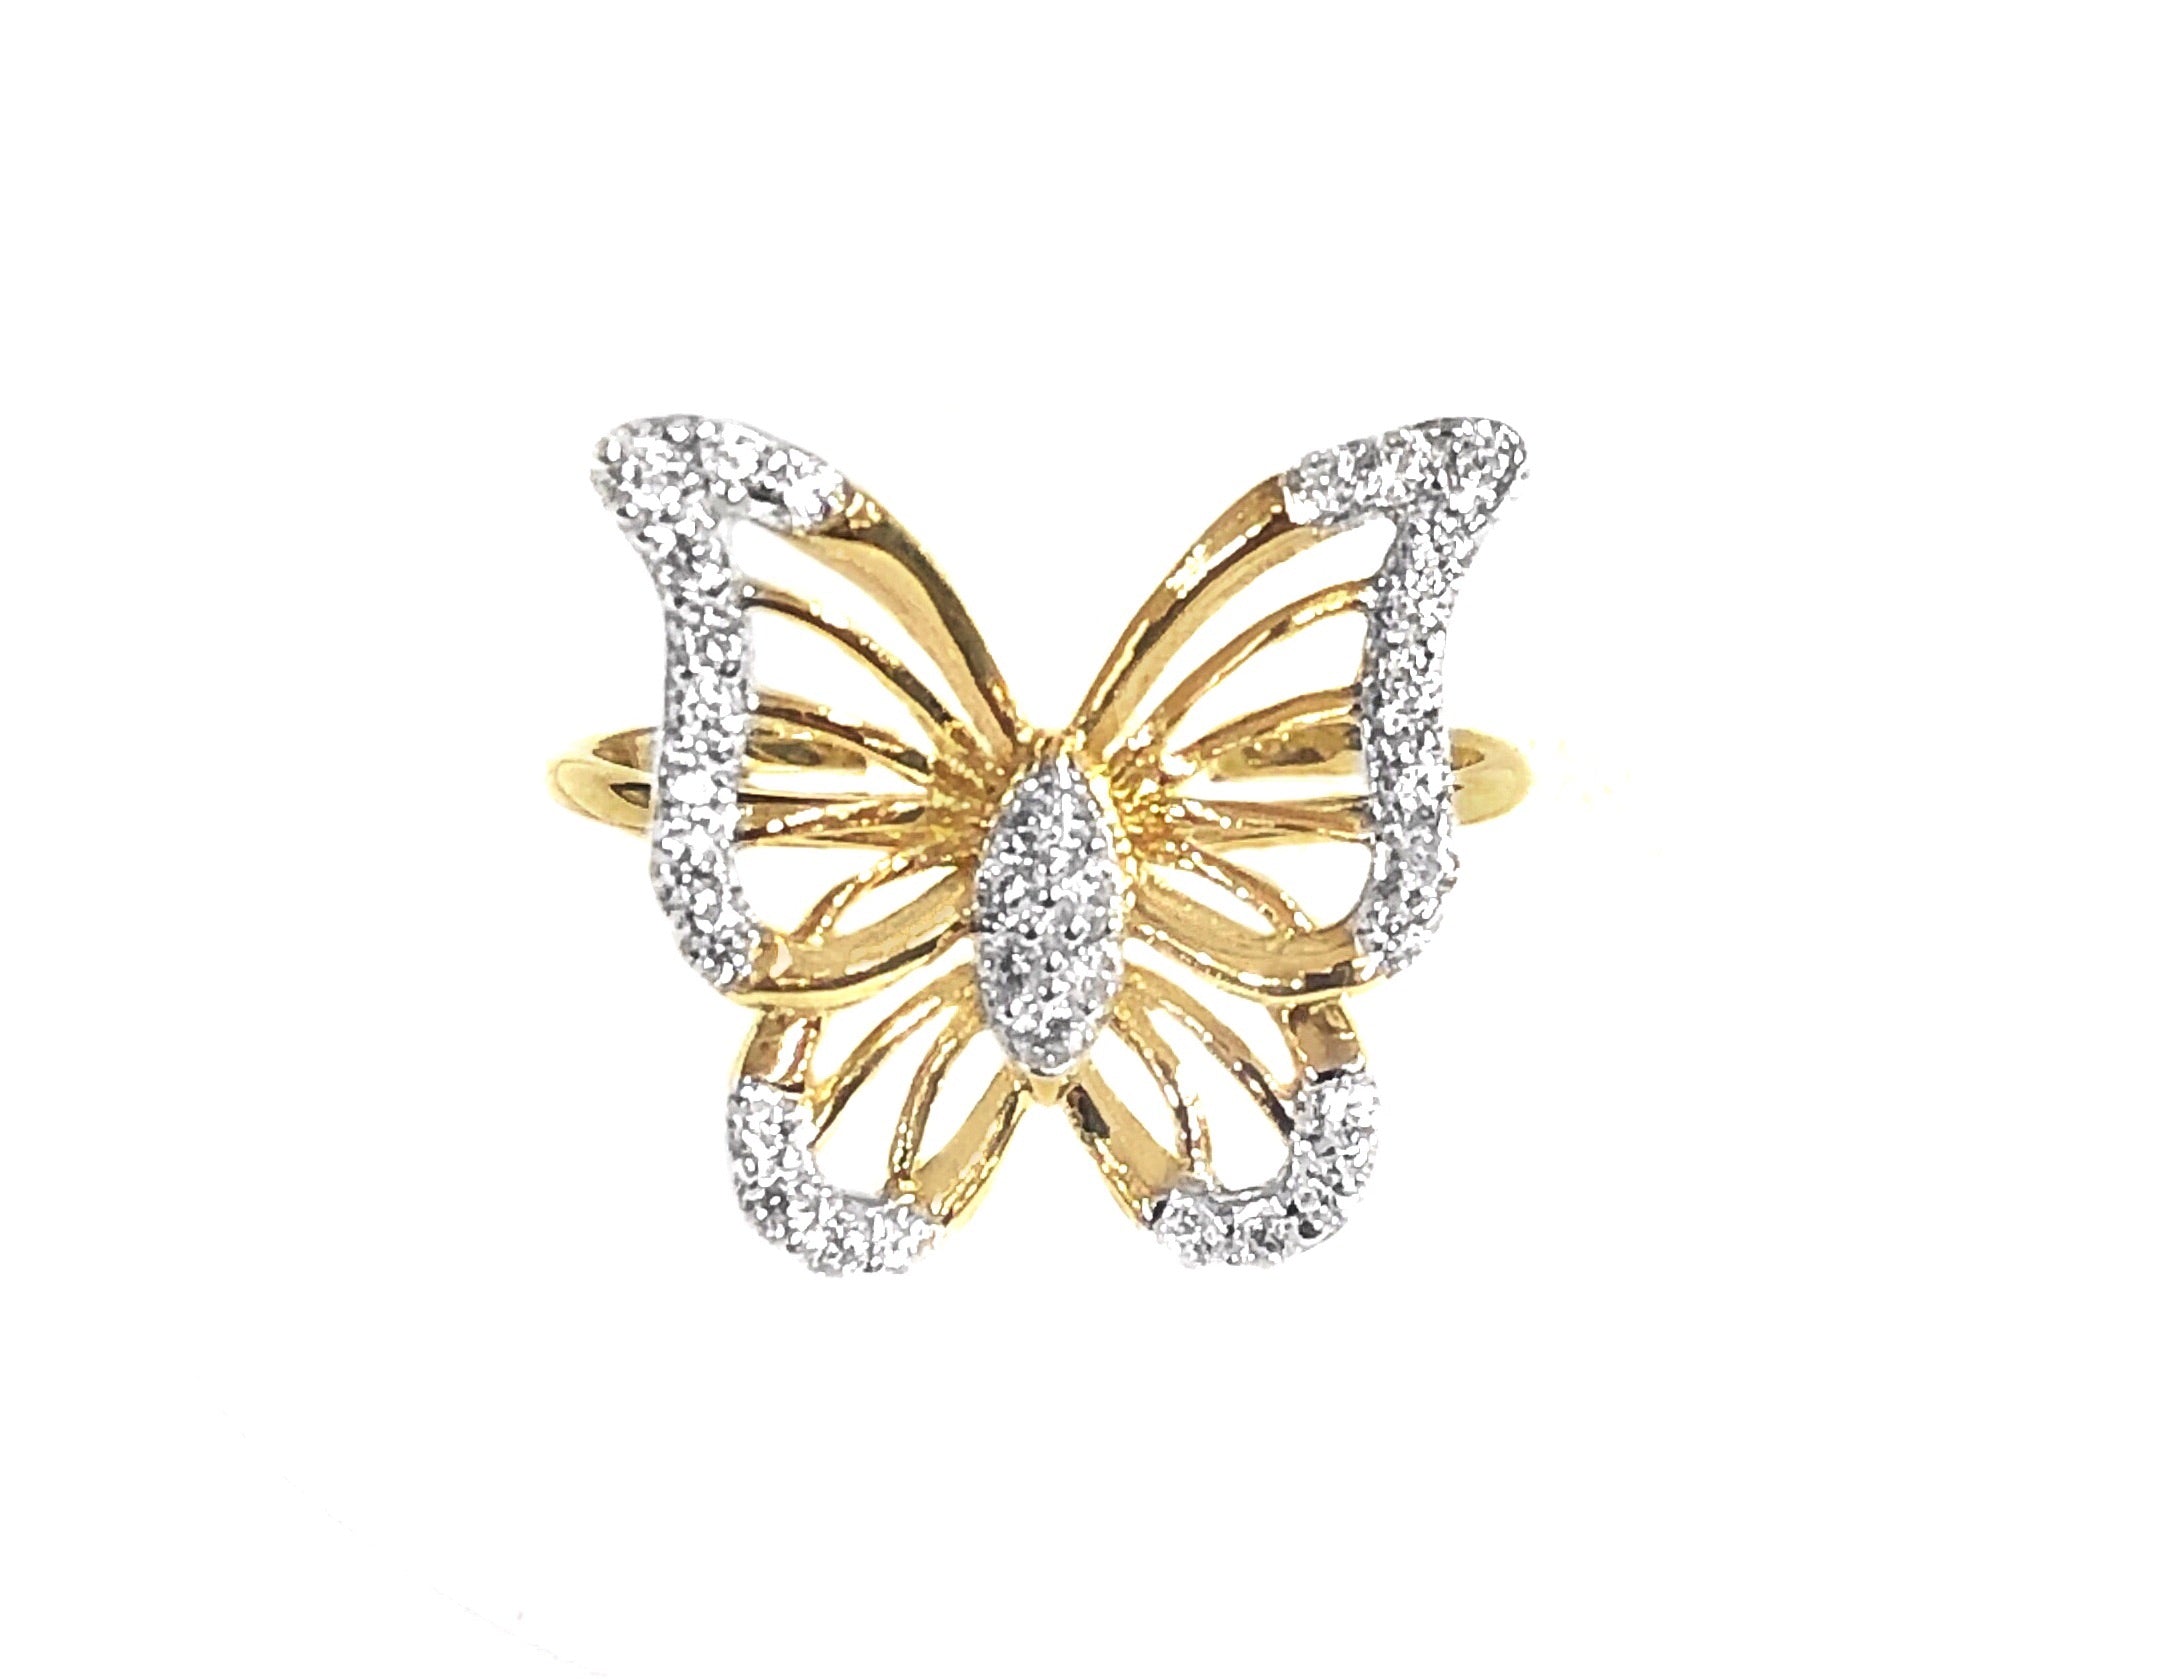 14K YELLOW GOLD PAVE LADY BUTTERFLY RING